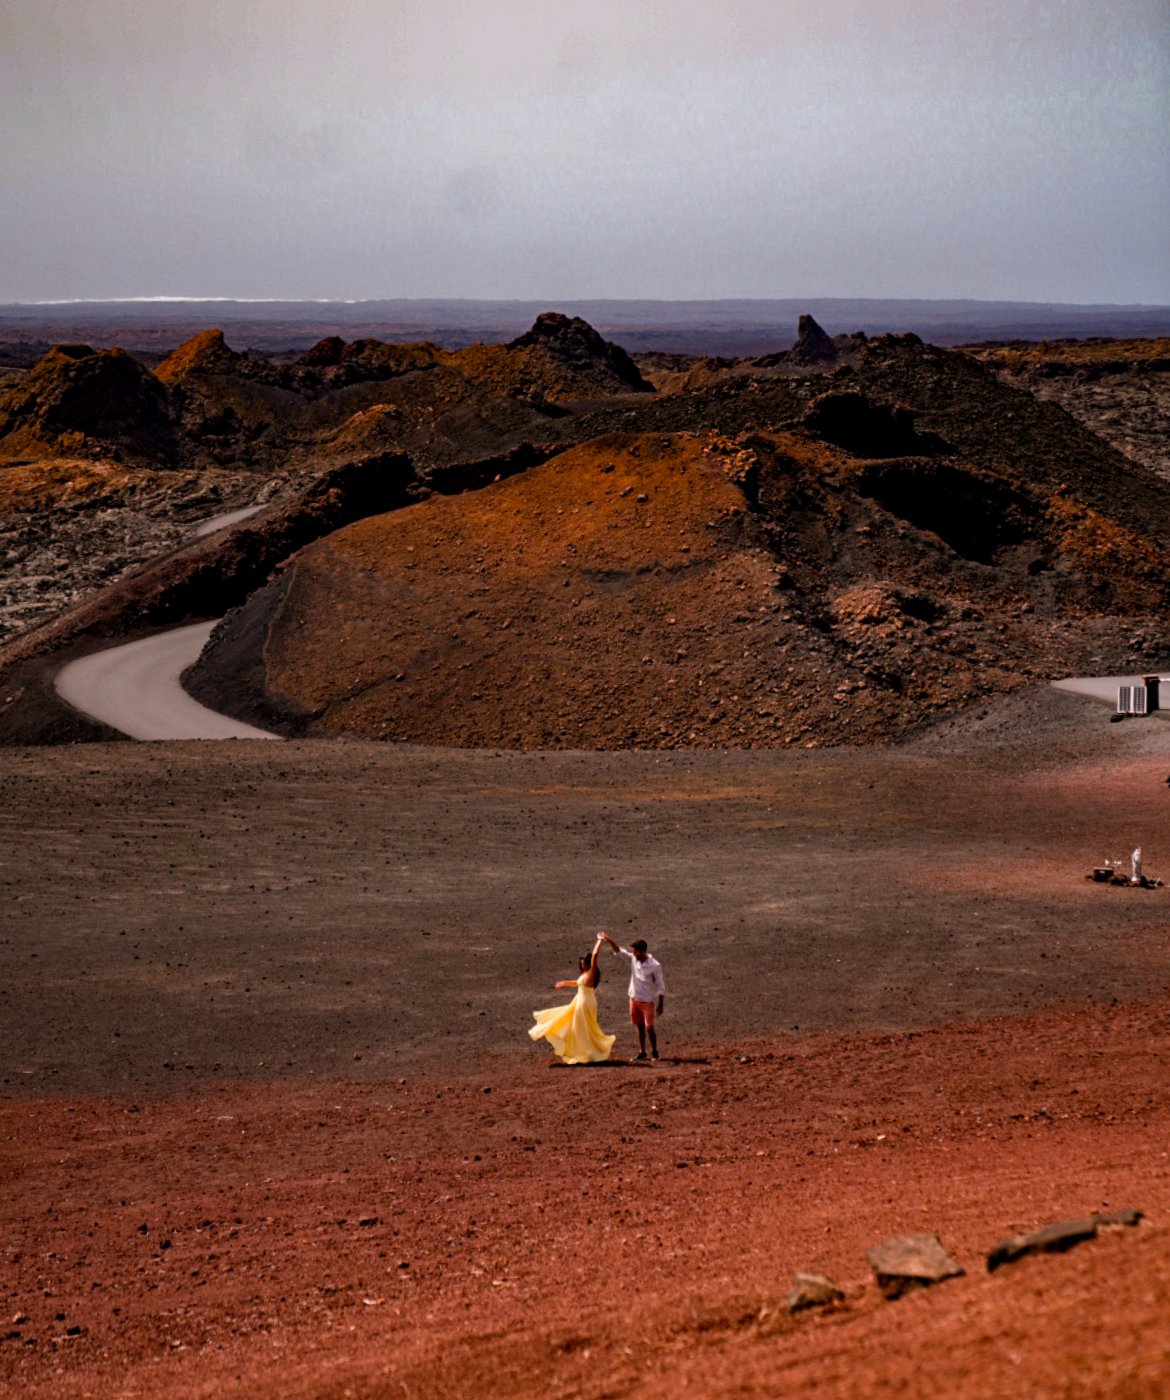 Timanfaya National Park, things to see in Lanzarote in the Canary Islands